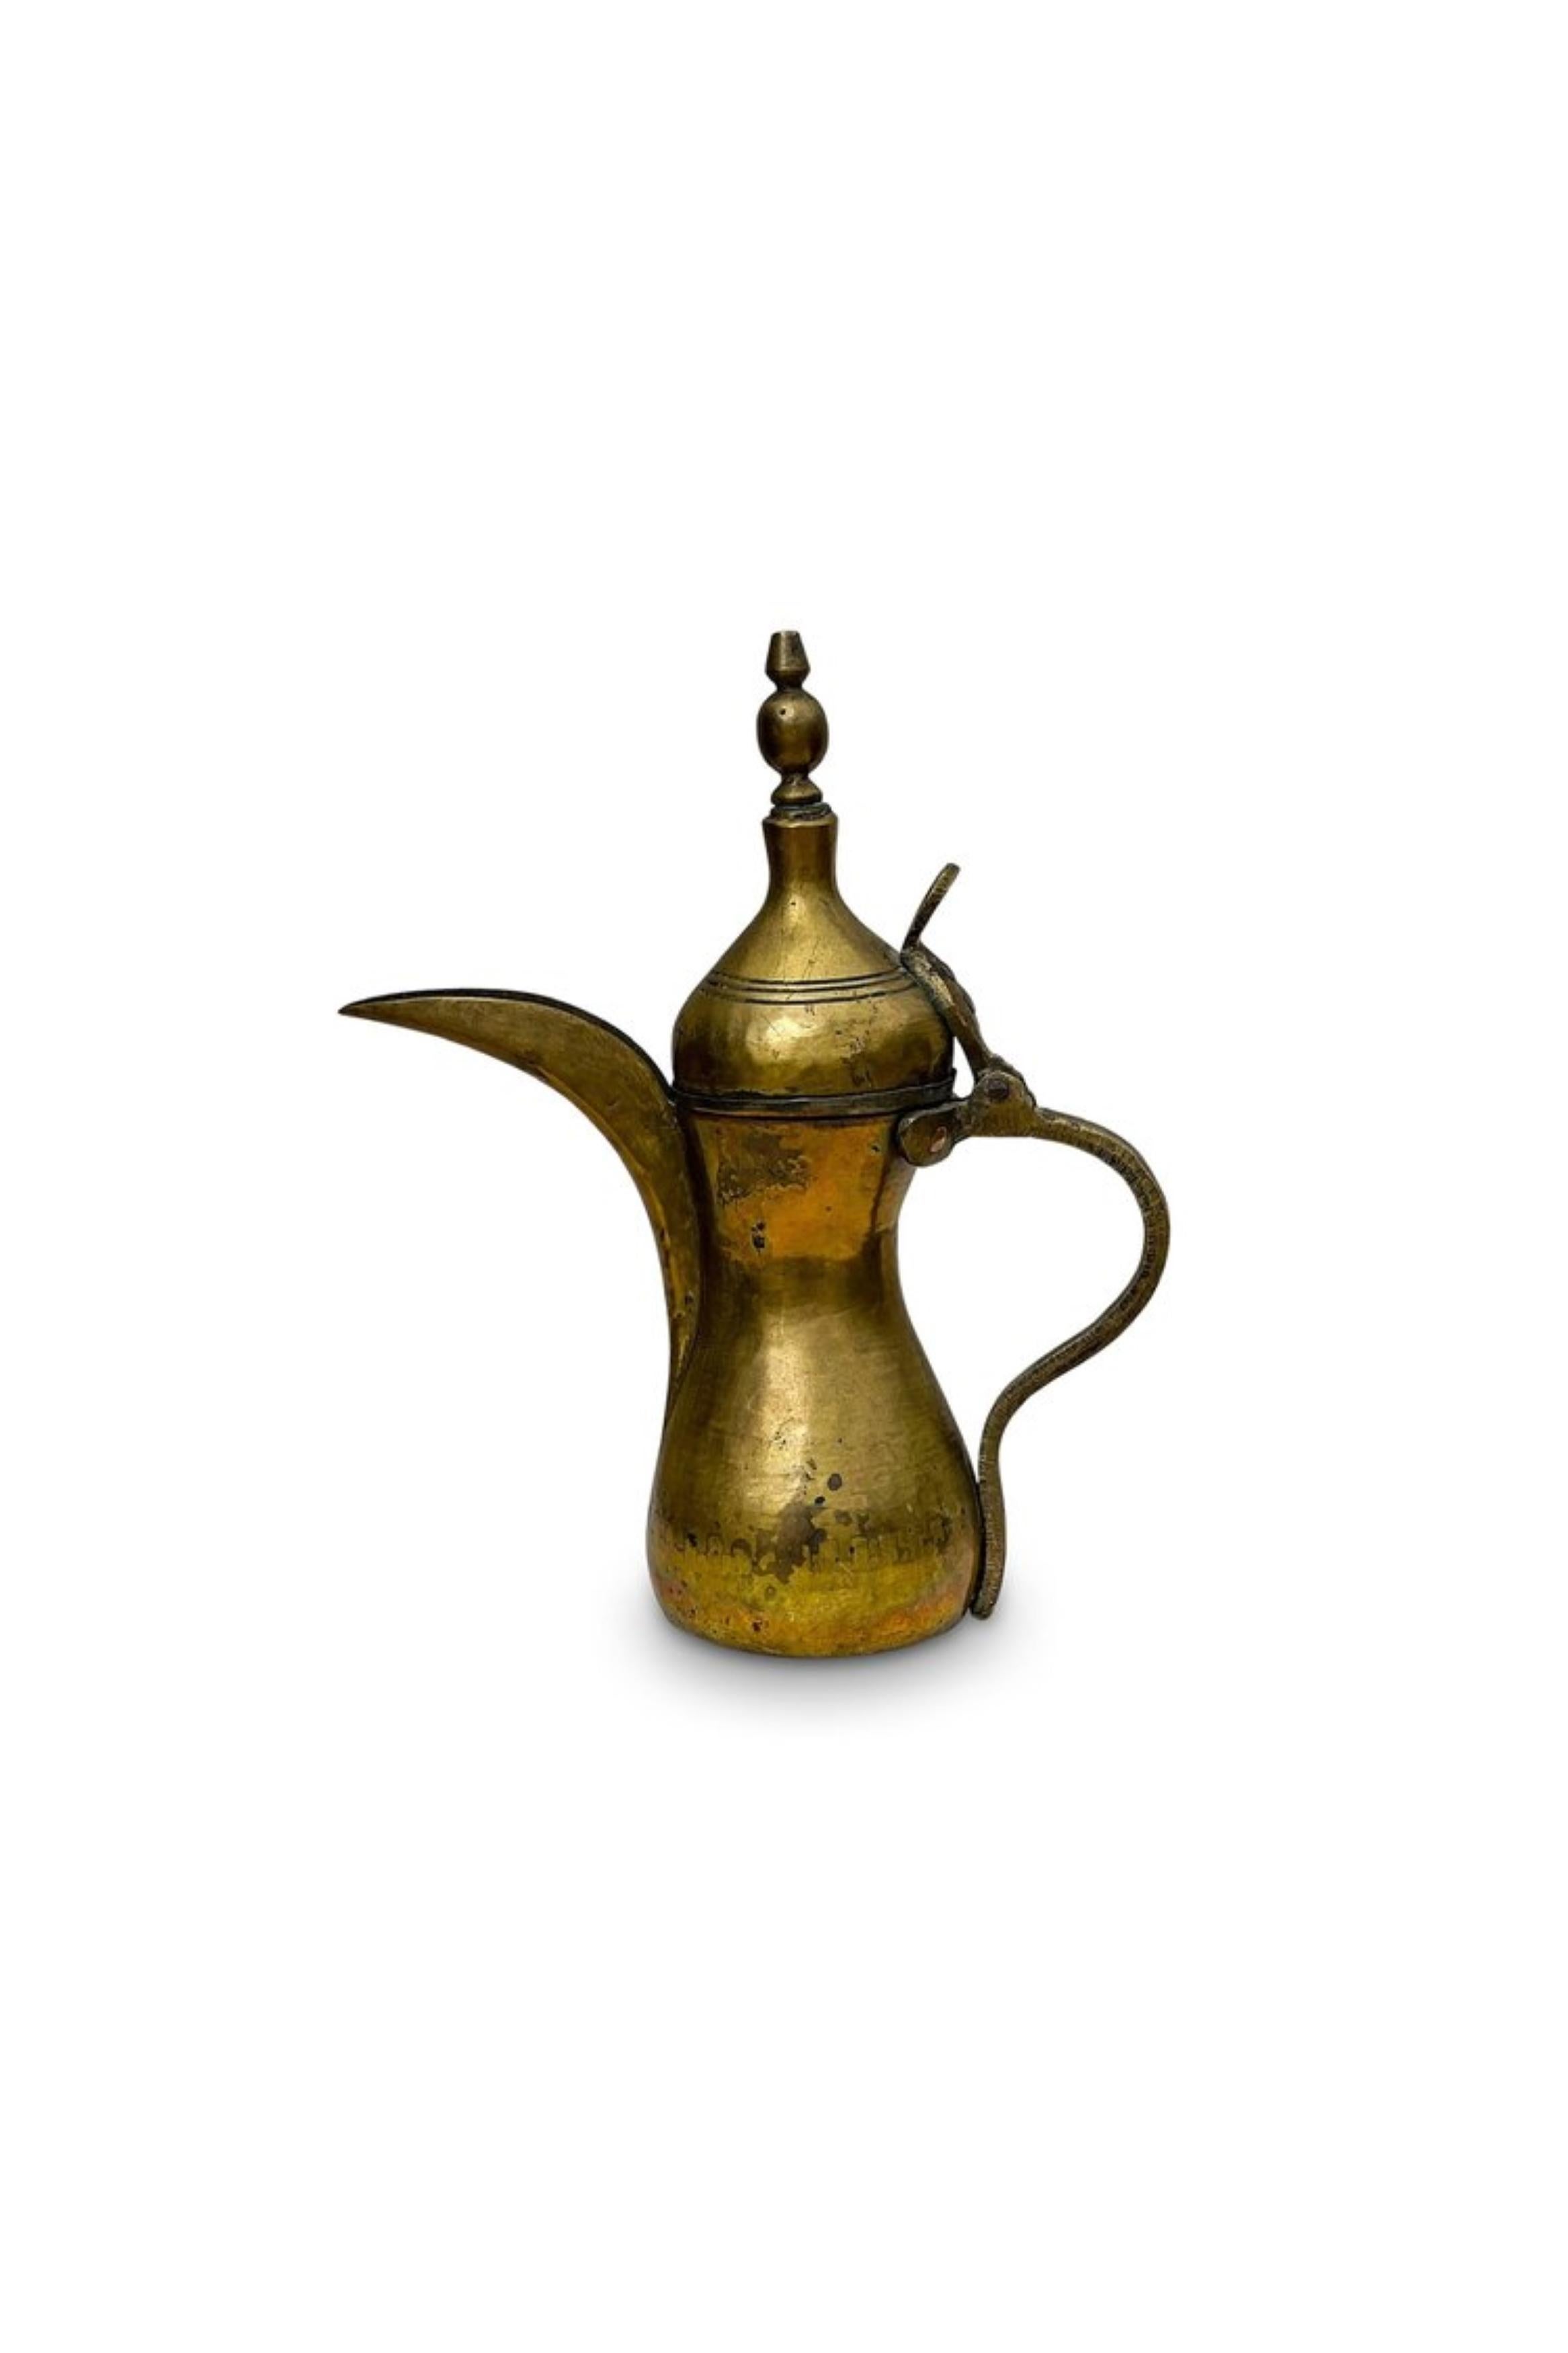 This beautifully crafted dallah, often used for brewing and serving coffee, made of brass, features intricate designs typical of Middle Eastern artistry, showcasing skilled metalwork. The pot has a distinctive shape with a long spout, a broad base,